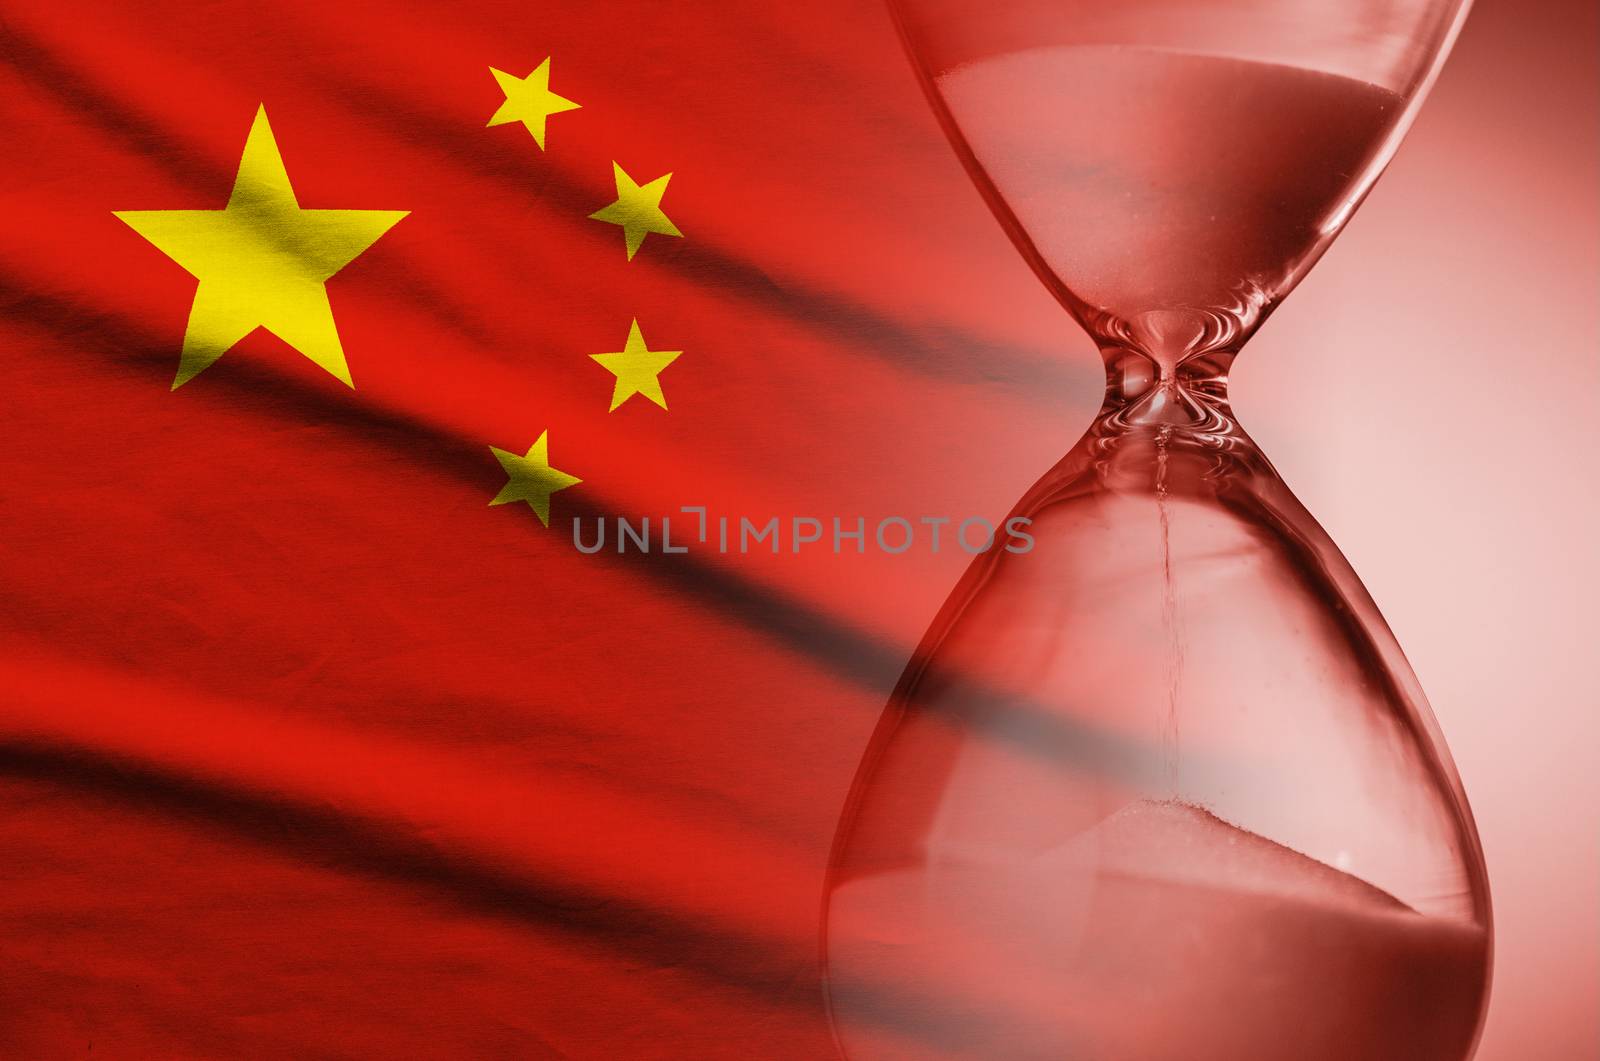 Sand running through an hourglass on the flag of China in a conceptual image of deadlines, urgency, and countdown